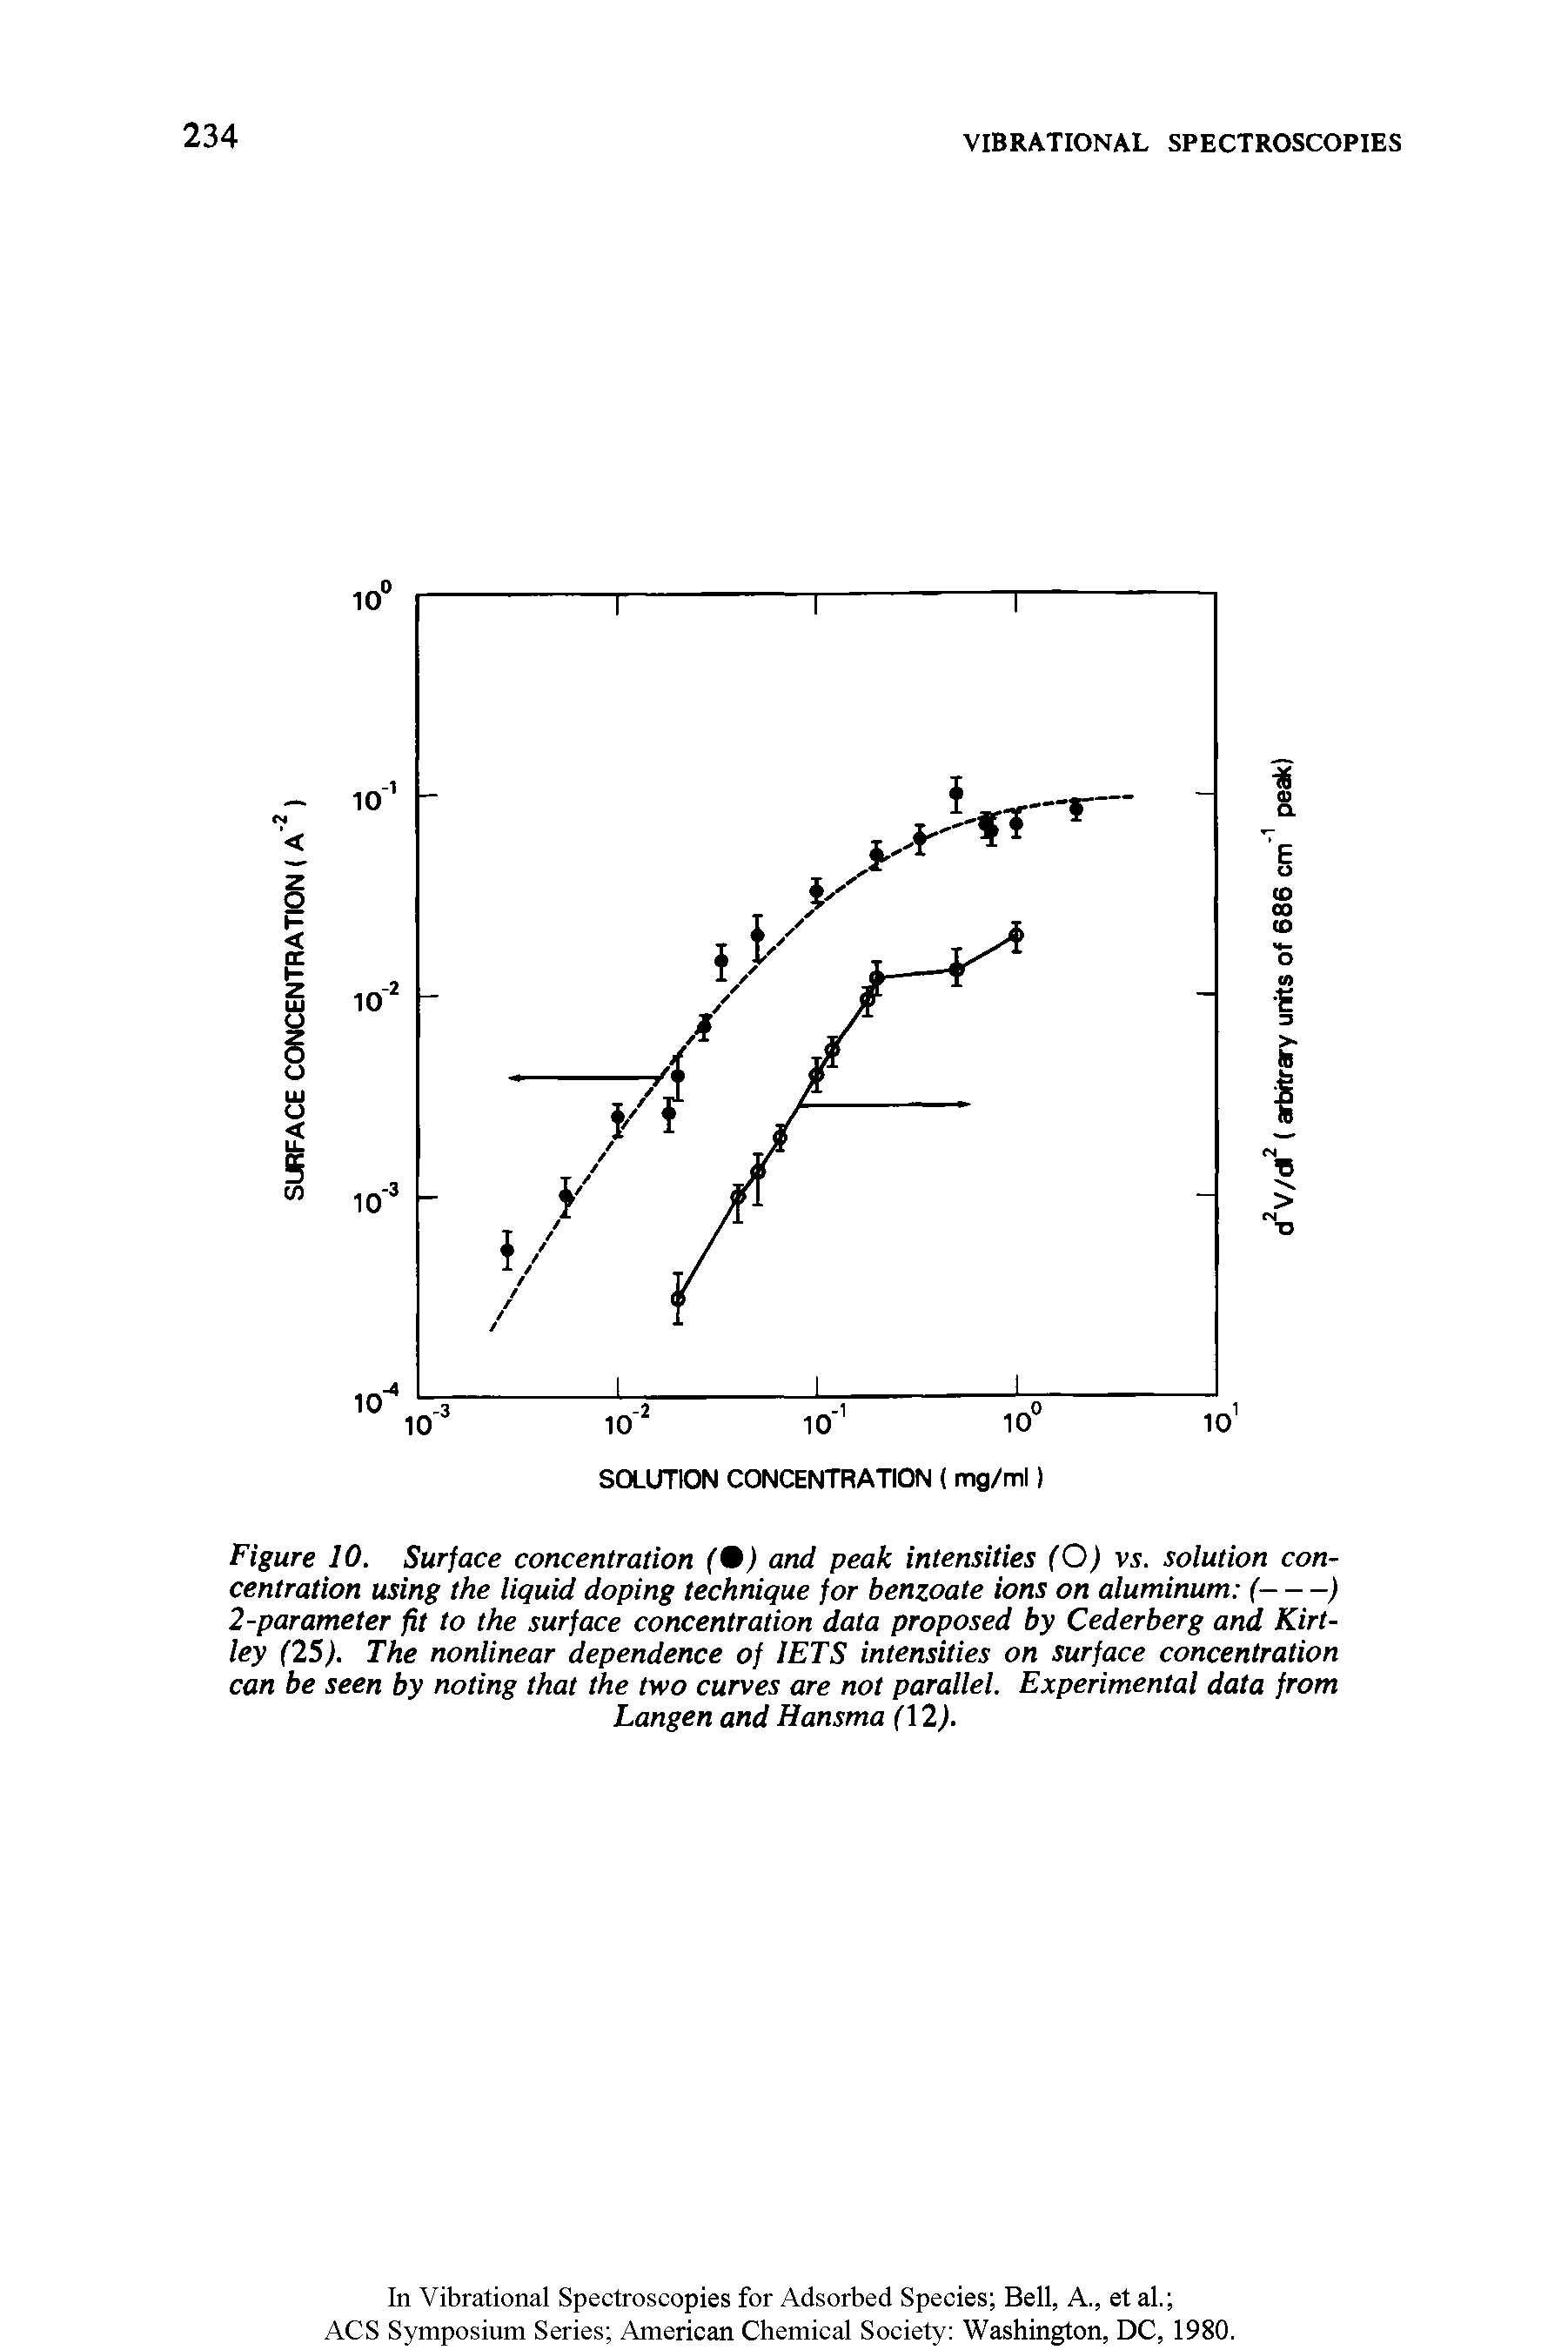 Figure 10. Surface concentration (9) and peak intensities (O) vs. solution concentration using the liquid doping technique for benzoate ions on aluminum (---)...